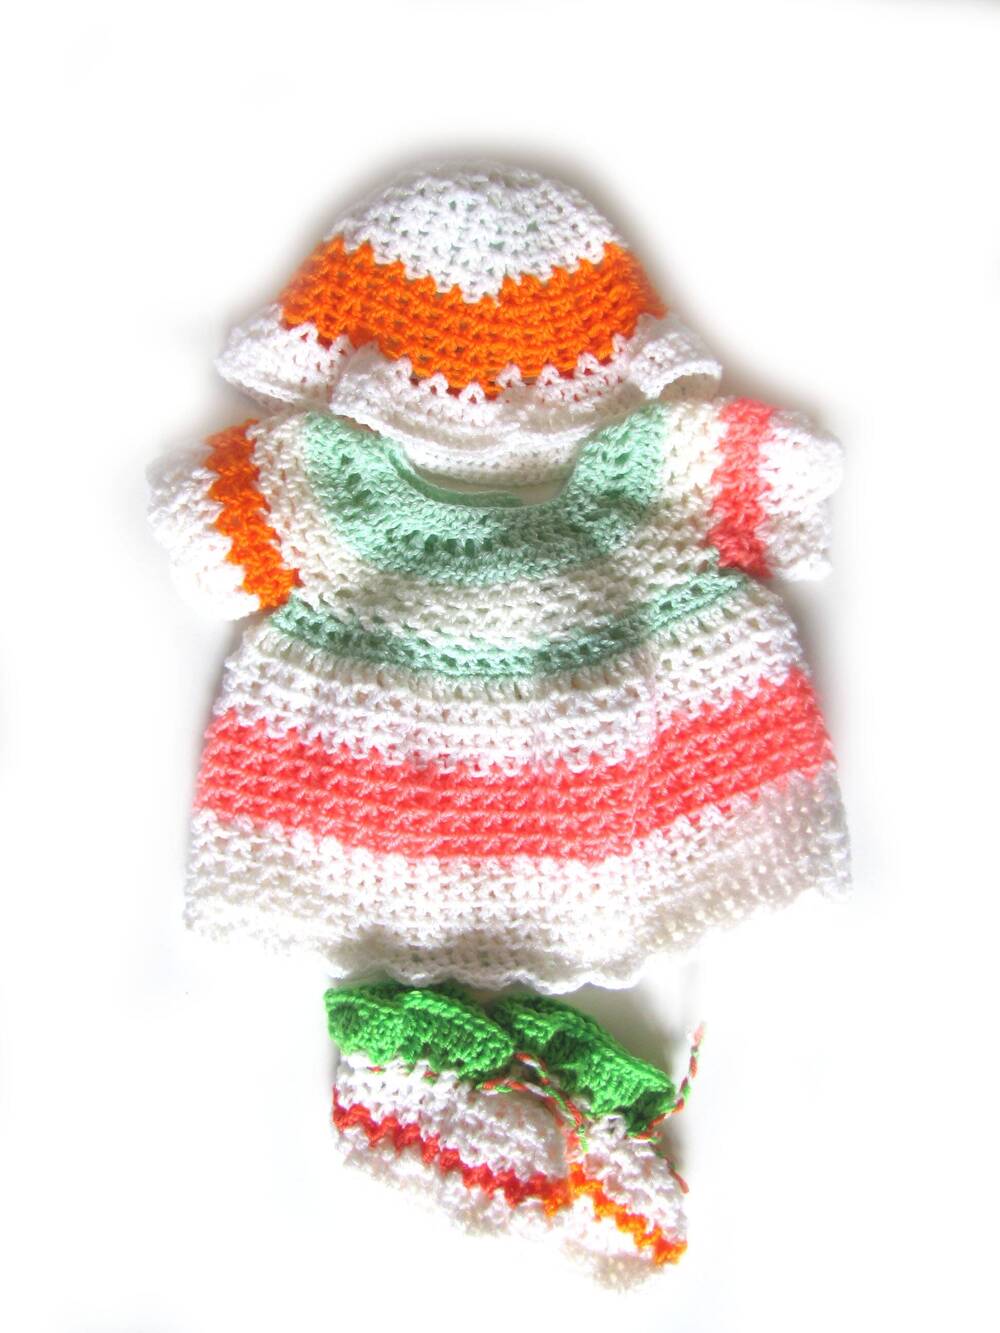 KSS Bright Colored Crocheted Dress, Booties and Hat 6 Months DR-175 KSS-DR-175-AZH